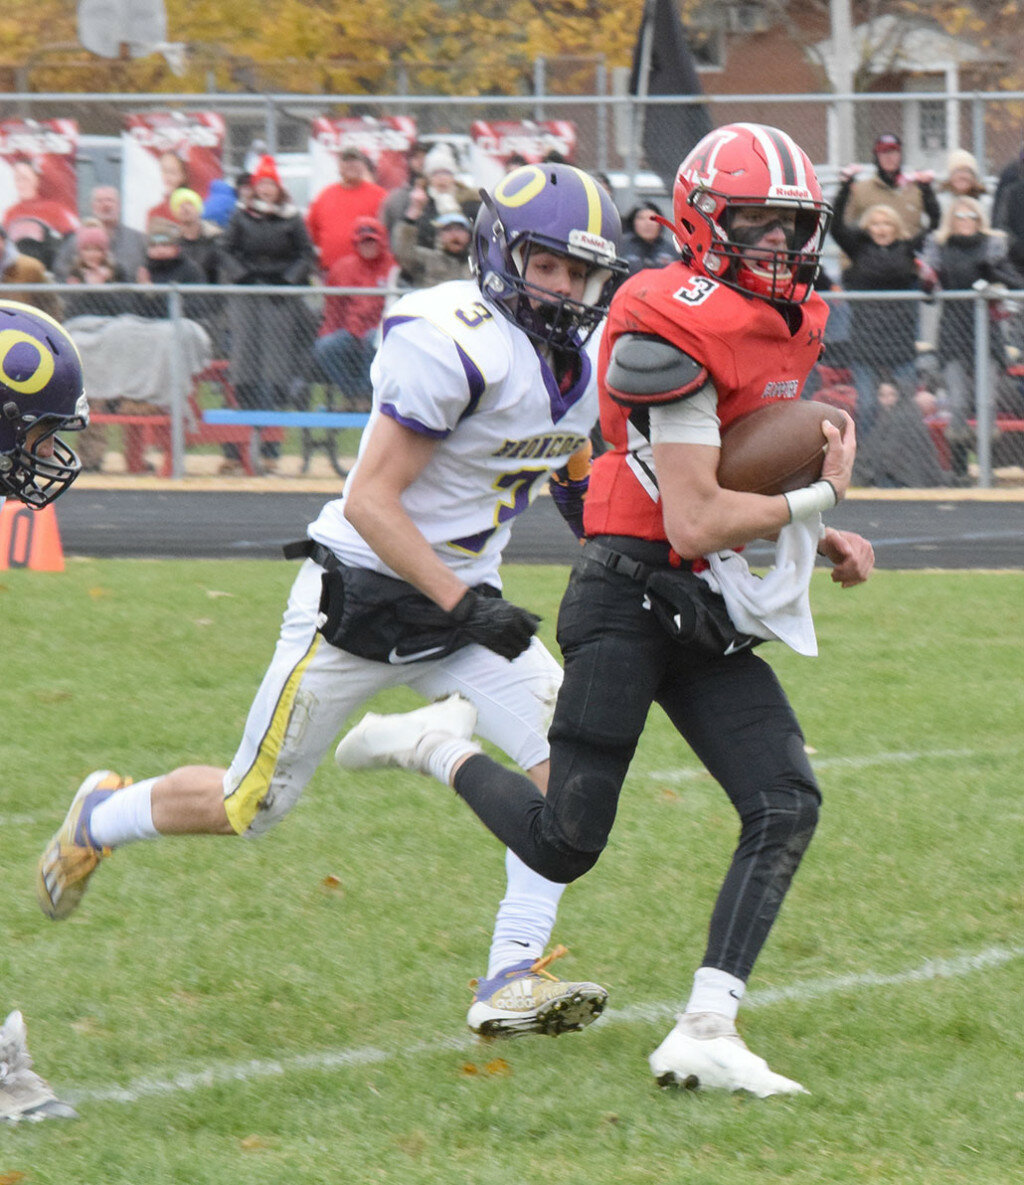 Amboy quarterback Tucker Lindenmeyer is off to the races on a long gain while Orangeville’s Brayden Cahoon tries to chase him down in the semifinals of the 8-man playoffs on Nov. 13 at the AHS field. (Reporter photo)